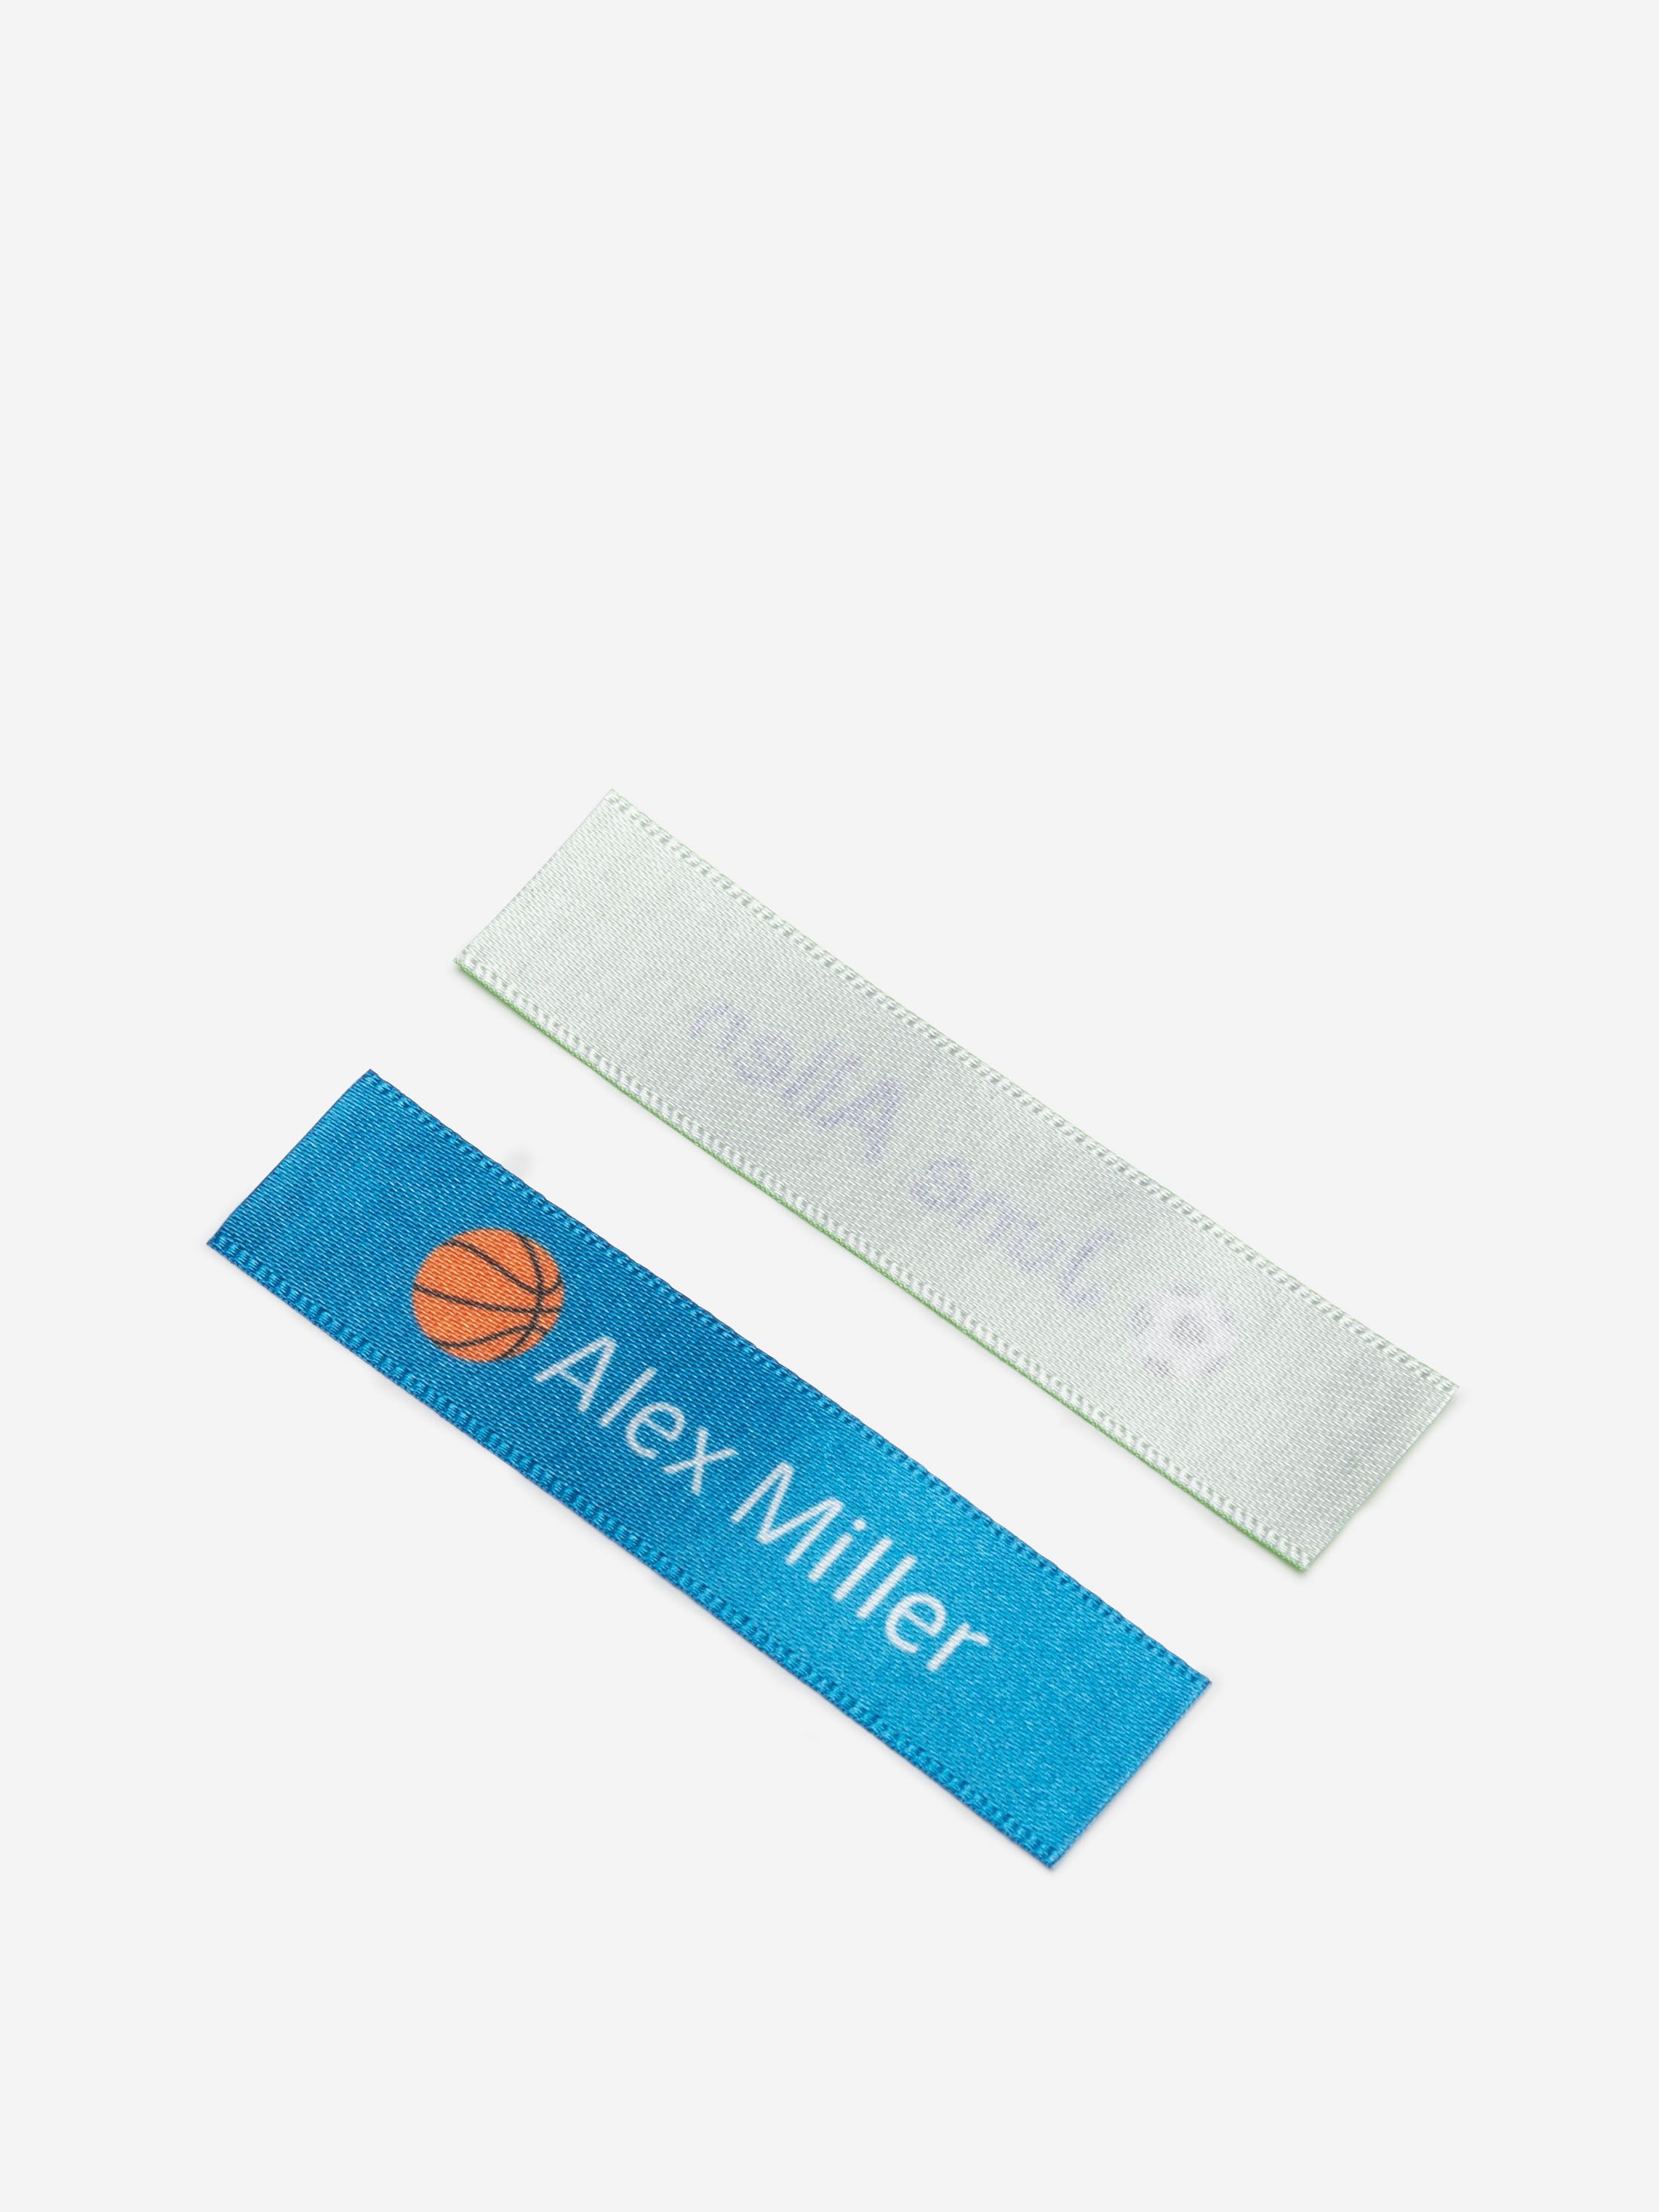 custom fabric name tags front and back